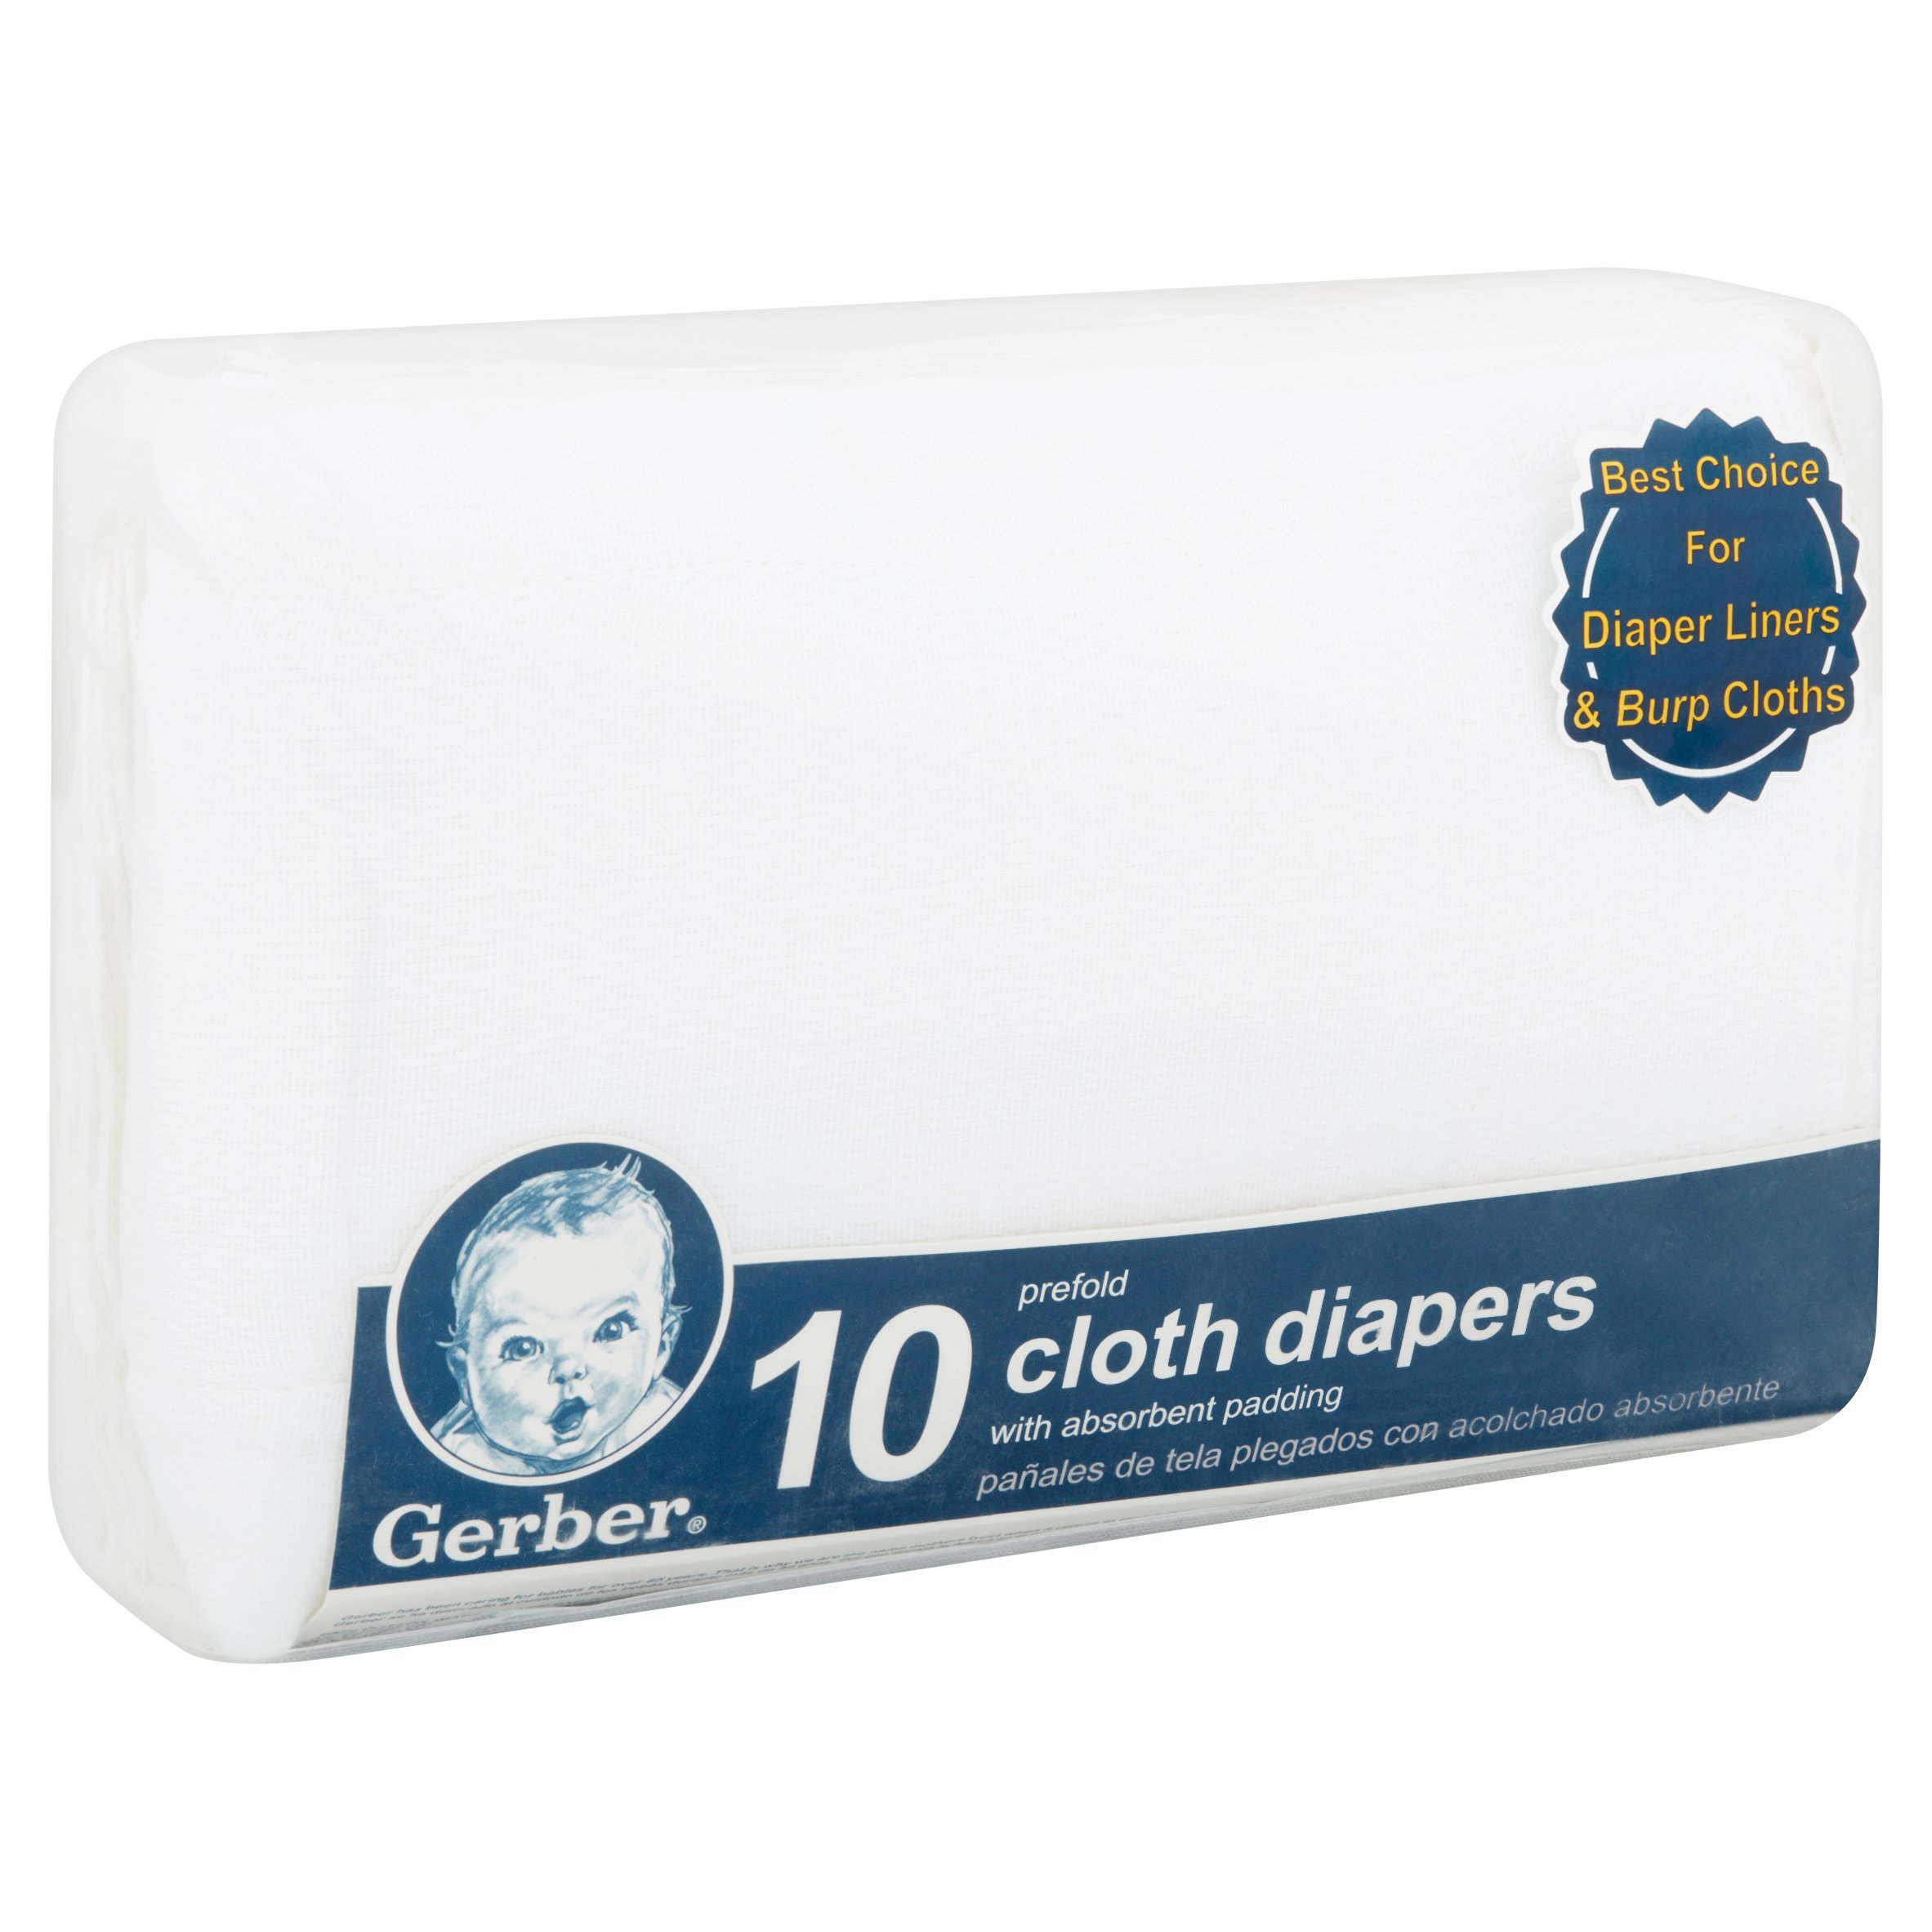 Gerber 100% Cotton Prefold Cloth Baby Diaper, White 10 Pack - image 3 of 8